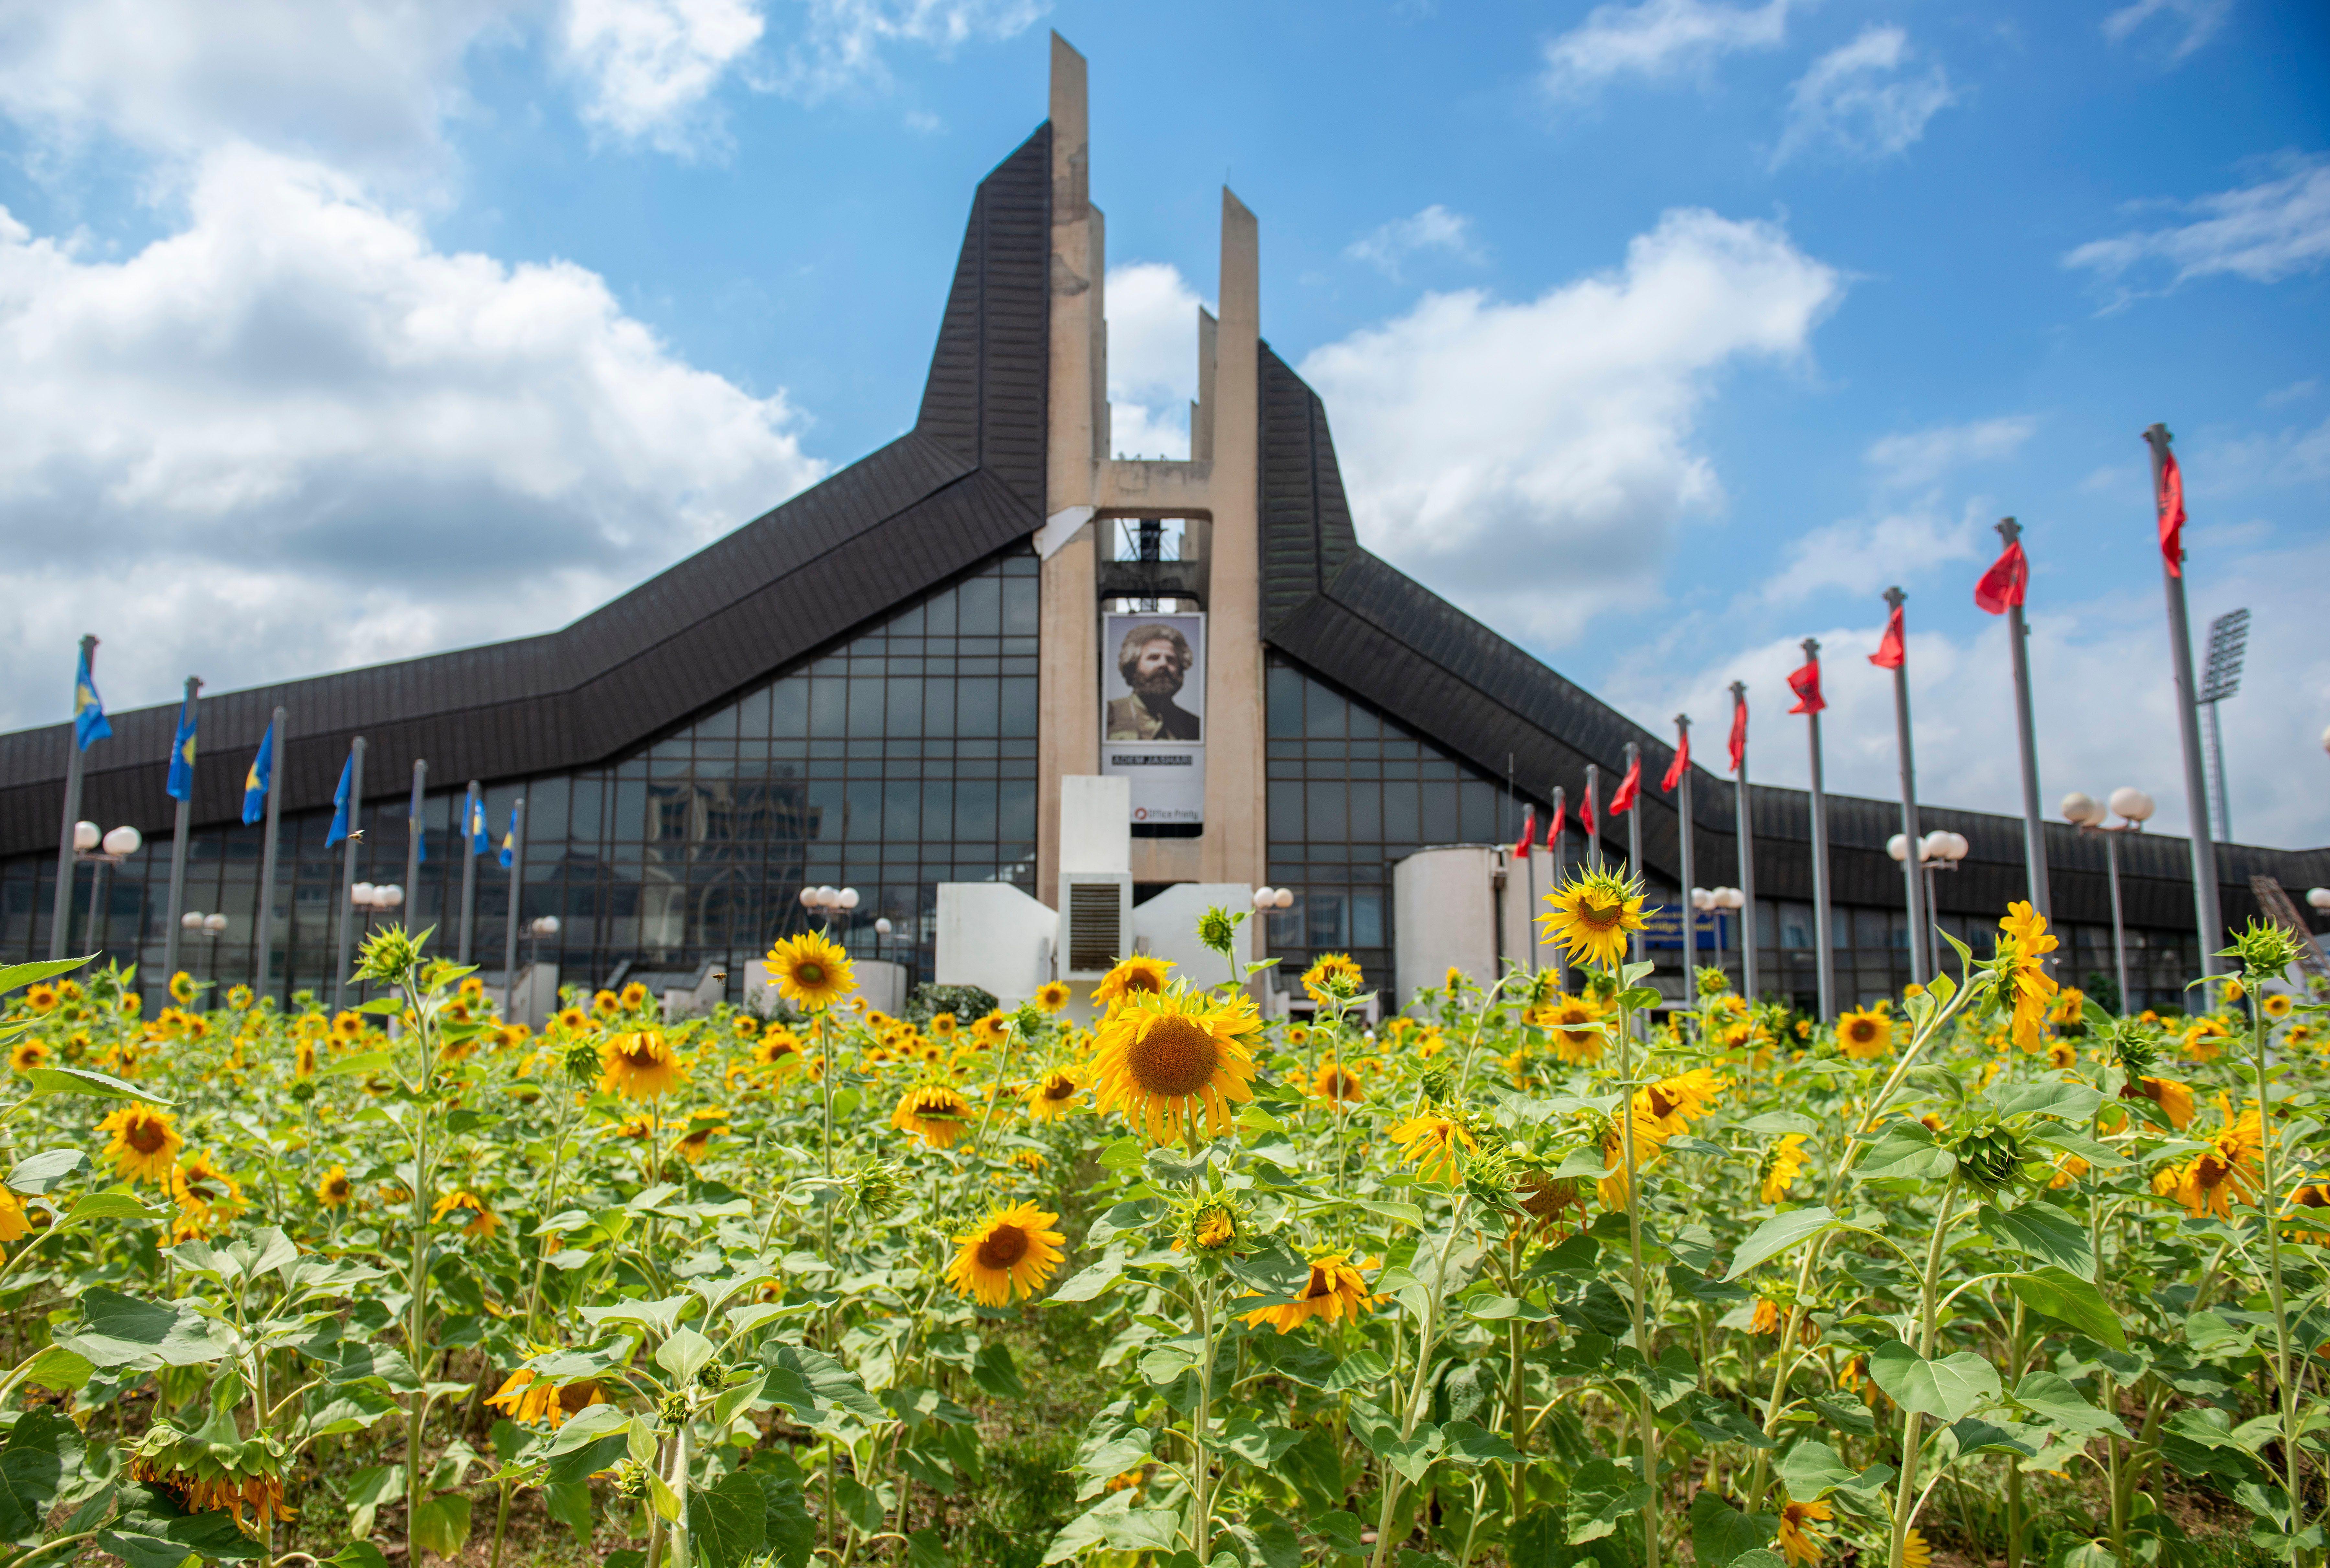 sunflower fields Agnes Denes – a heroine of the land art movement – planted in the heart of Kosovo's capital Prishtina. Many flowers in front of monumental building.